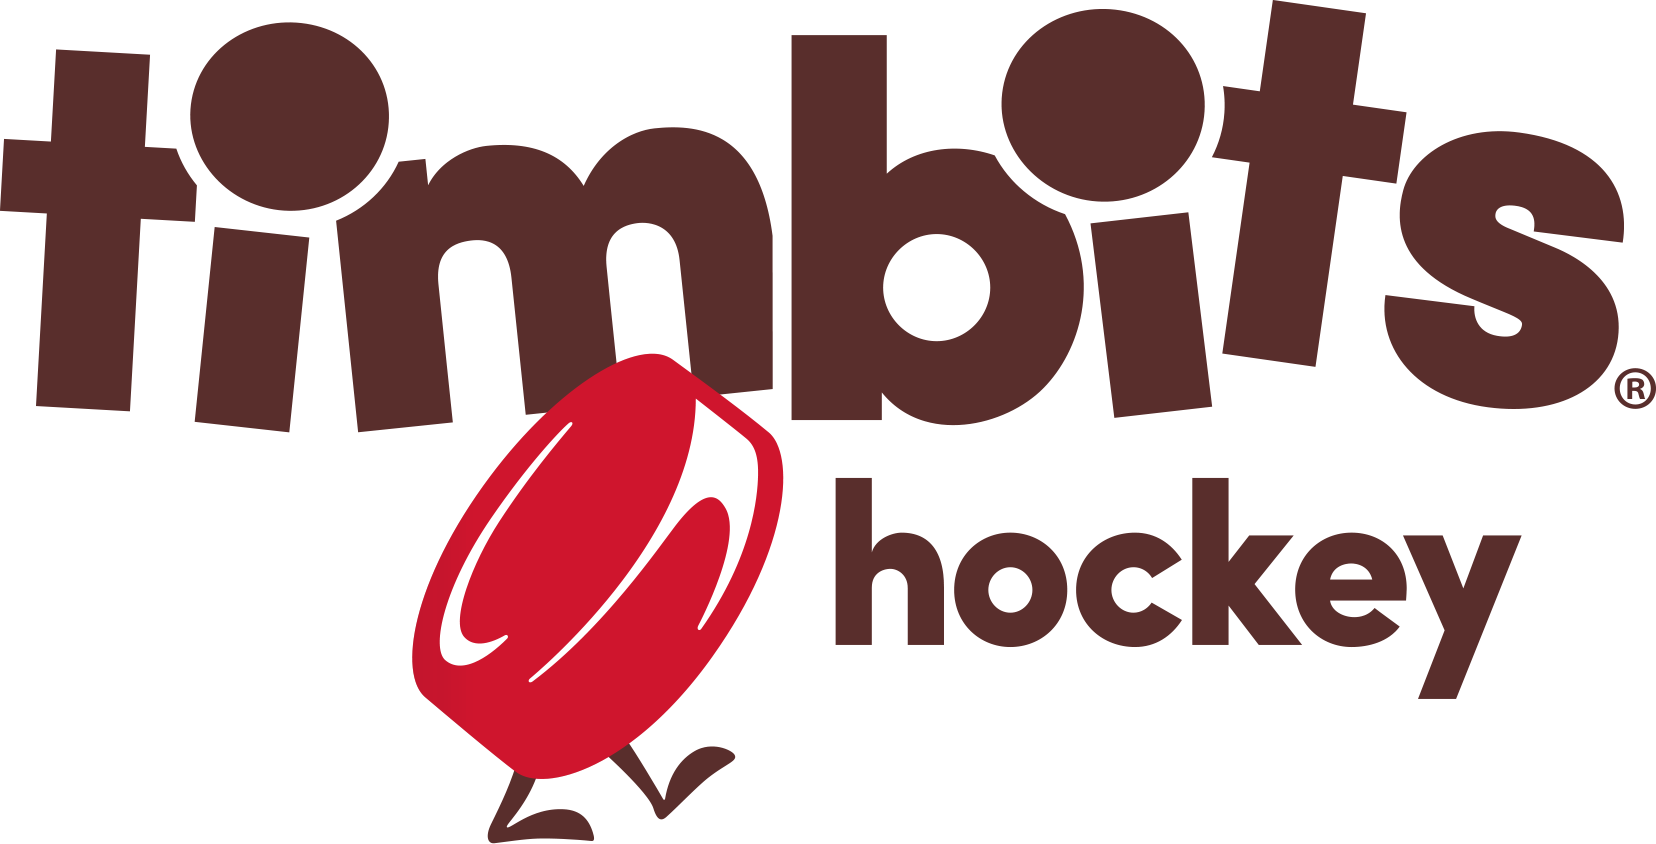 TimBits_Hockey_Revised_V2.png